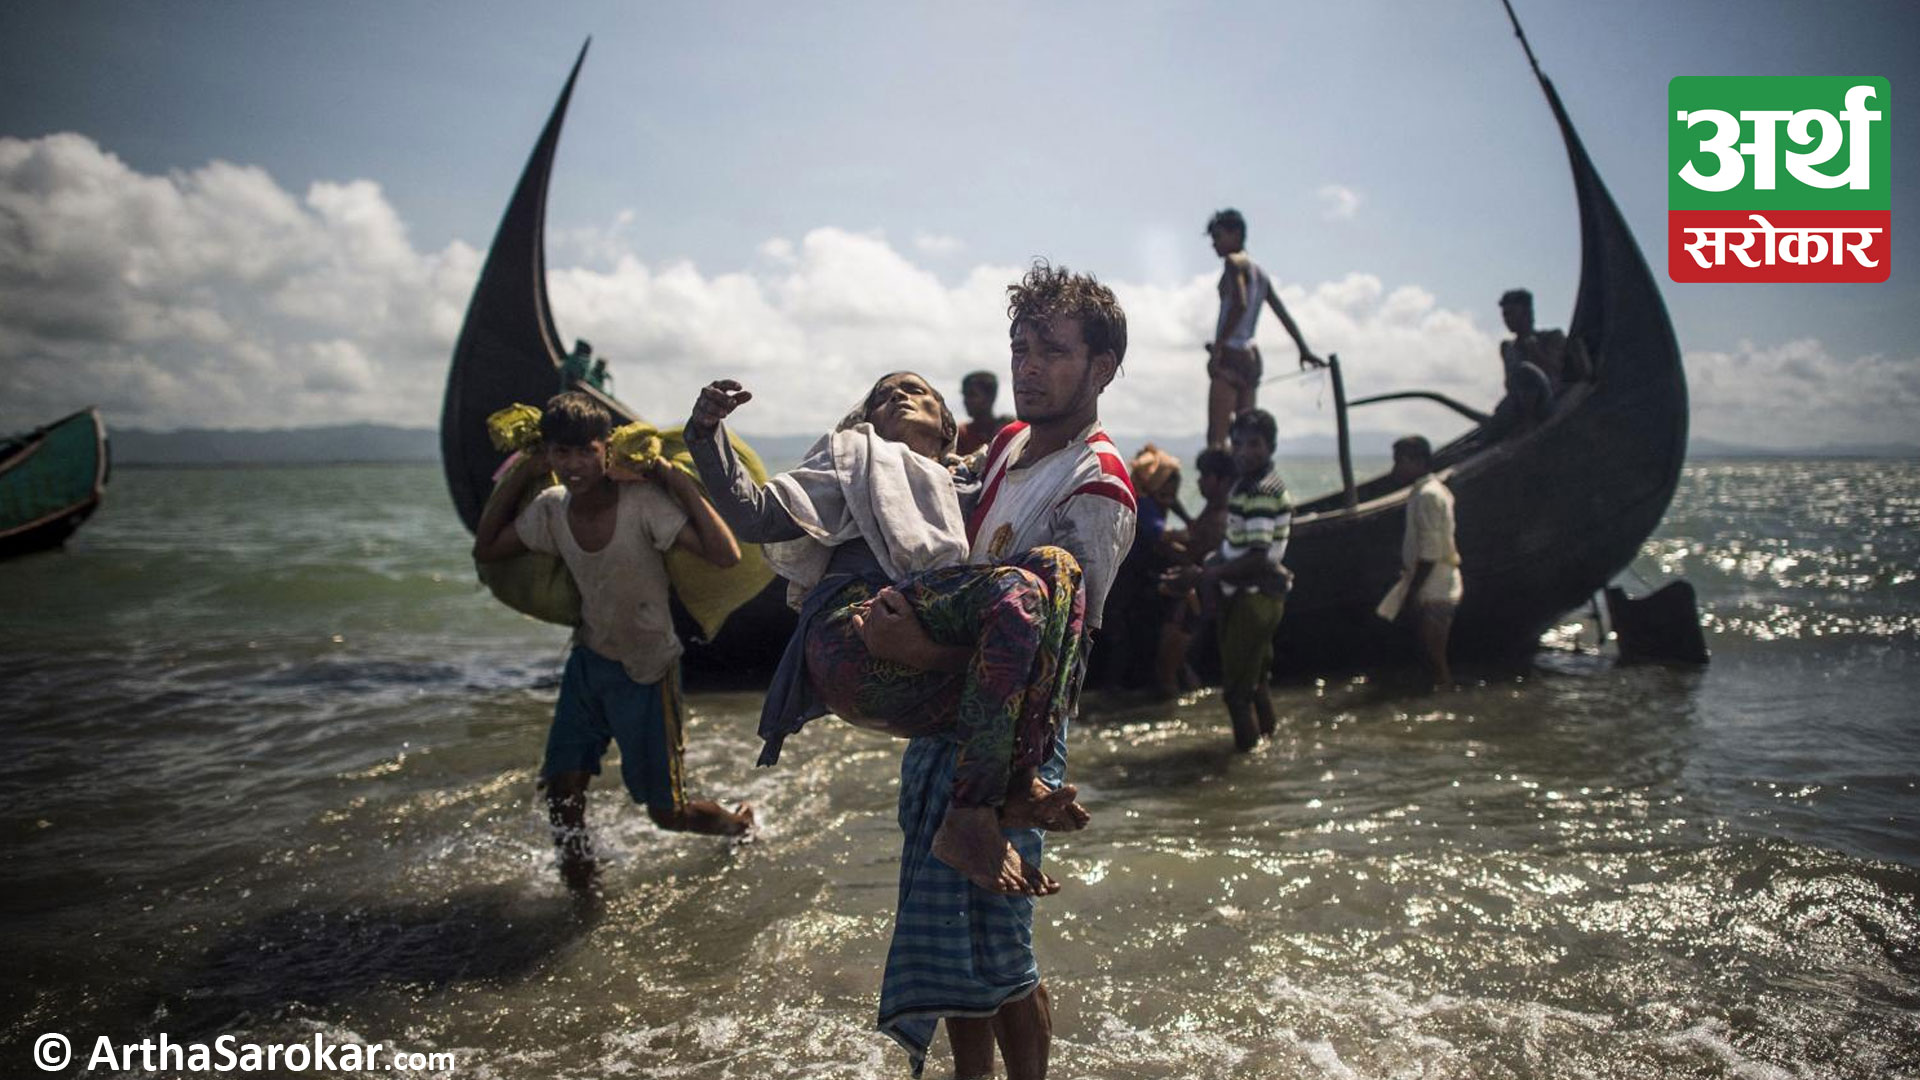 Why should world need to ensure required ‘humanitarian assistance’ for the Rohingya refugees?